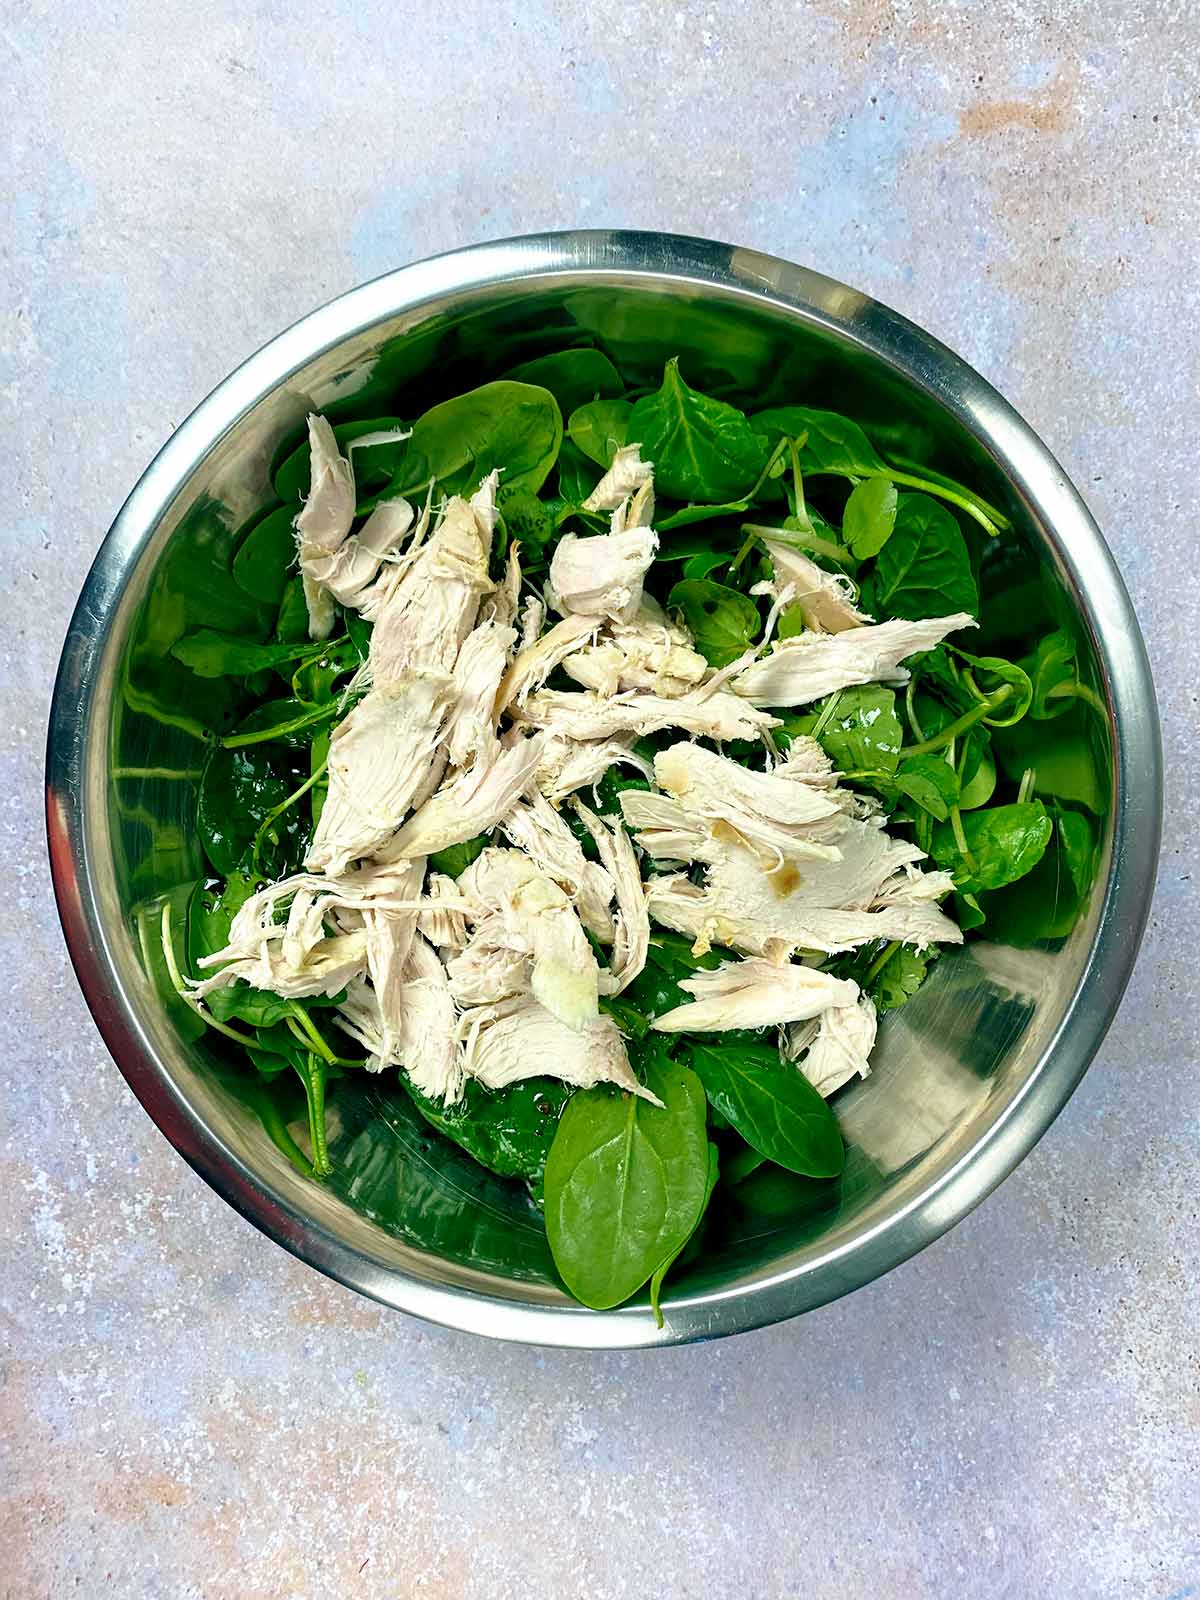 Salad leaves and shredded turkey in a metal mixing bowl.